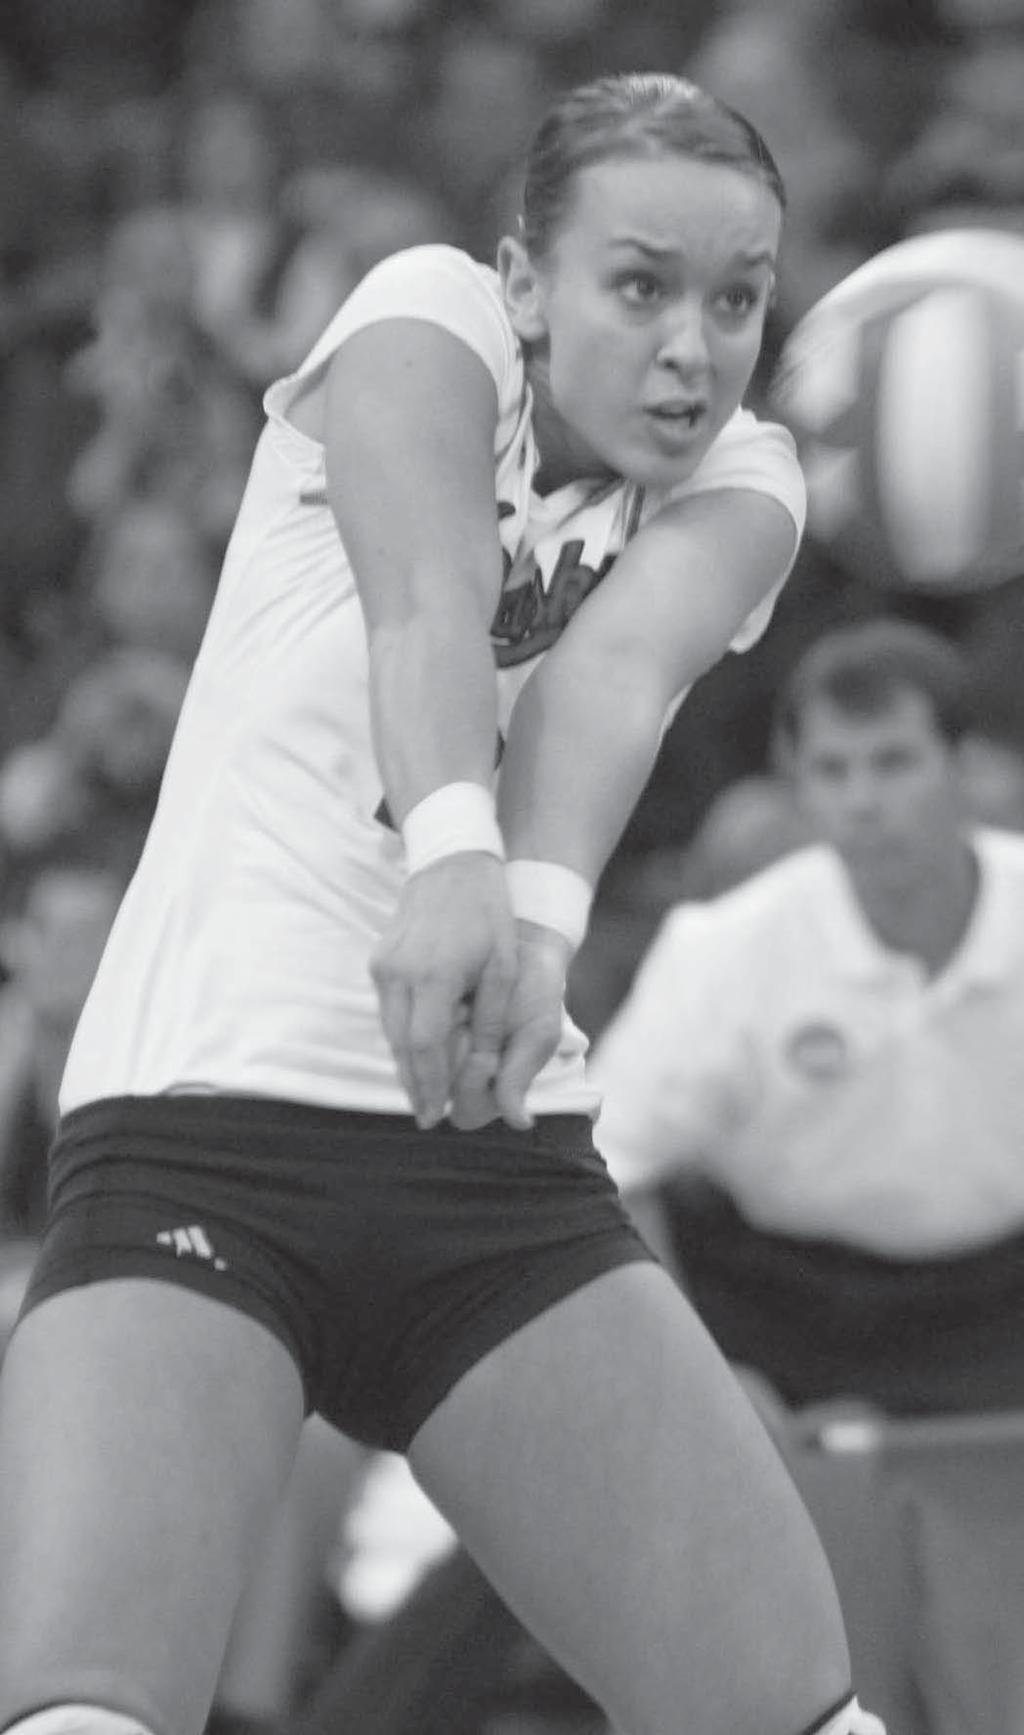 2009 PLAYERS Career Match-by-Match 2007 Season Date Opponent K E TA.Pct A SA D BL Aug. 24 vs. Tennessee 0 0 0.000 0 0 0 0 Sept. 3 CAL POLY 0 0 0.000 0 0 0 0 Sept. 26 at Kansas 0 0 0.000 2 0 5 0 Sept.